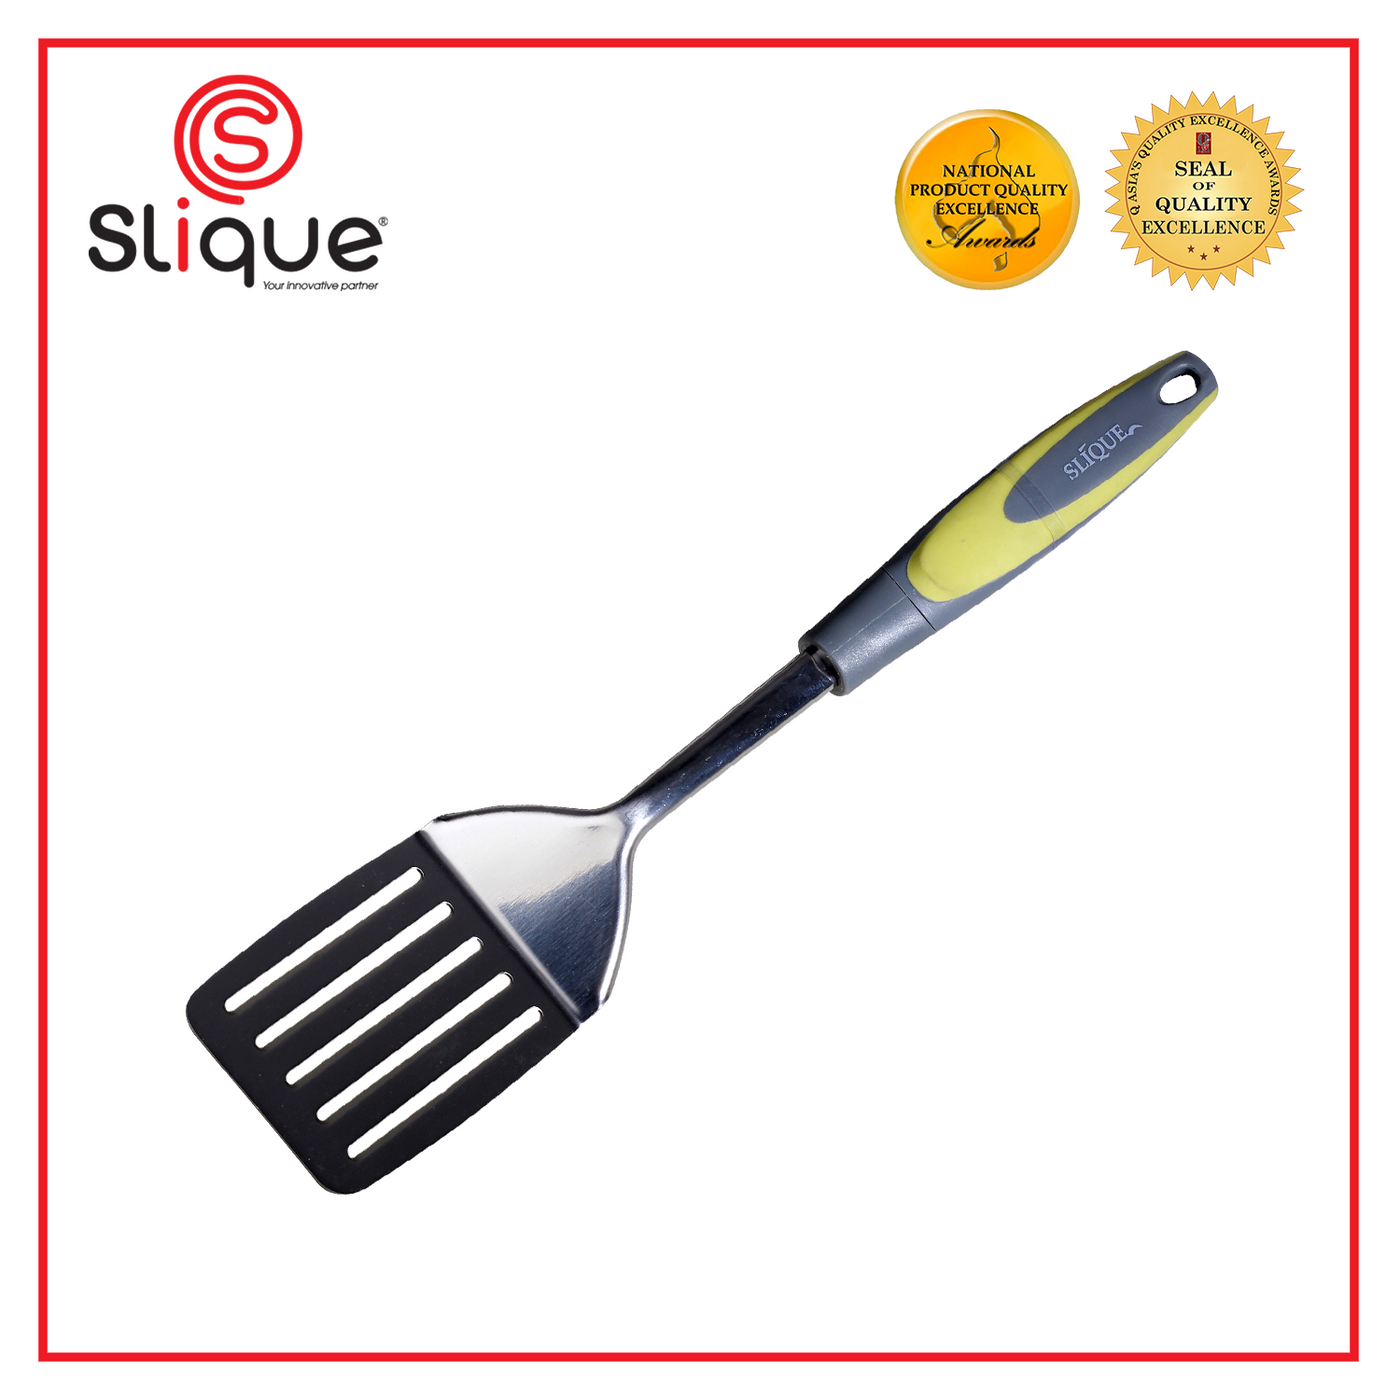 SLIQUE Premium 18/8 Stainless Steel Slotted Turner TPR Silicone Handle Kitchen Essentials Amazing Gift Idea For Any Occasion! (Green)